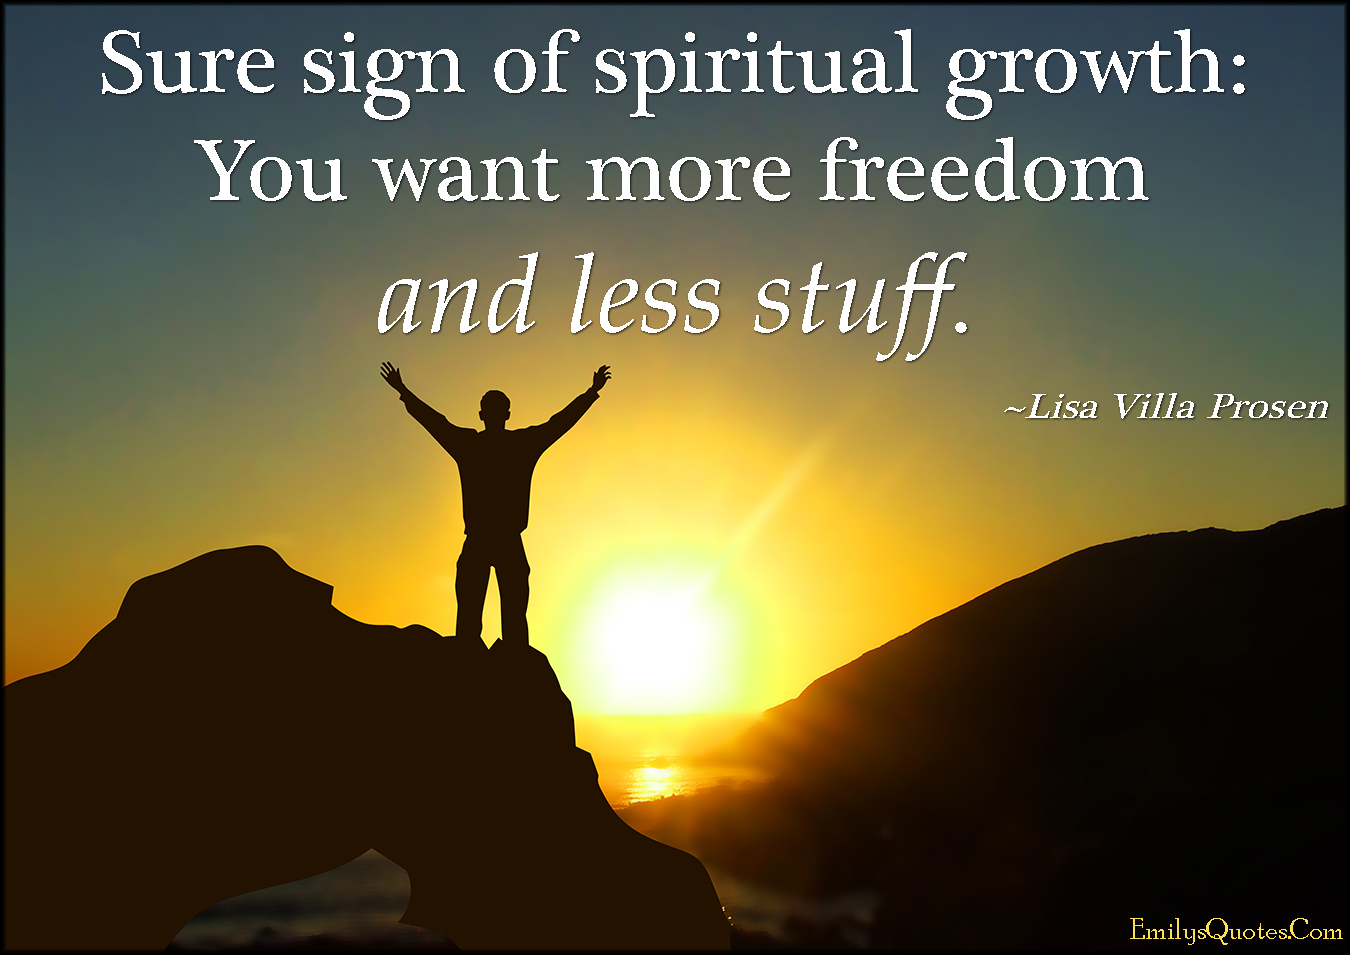 Sure sign of spiritual growth: You want more freedom and less stuff